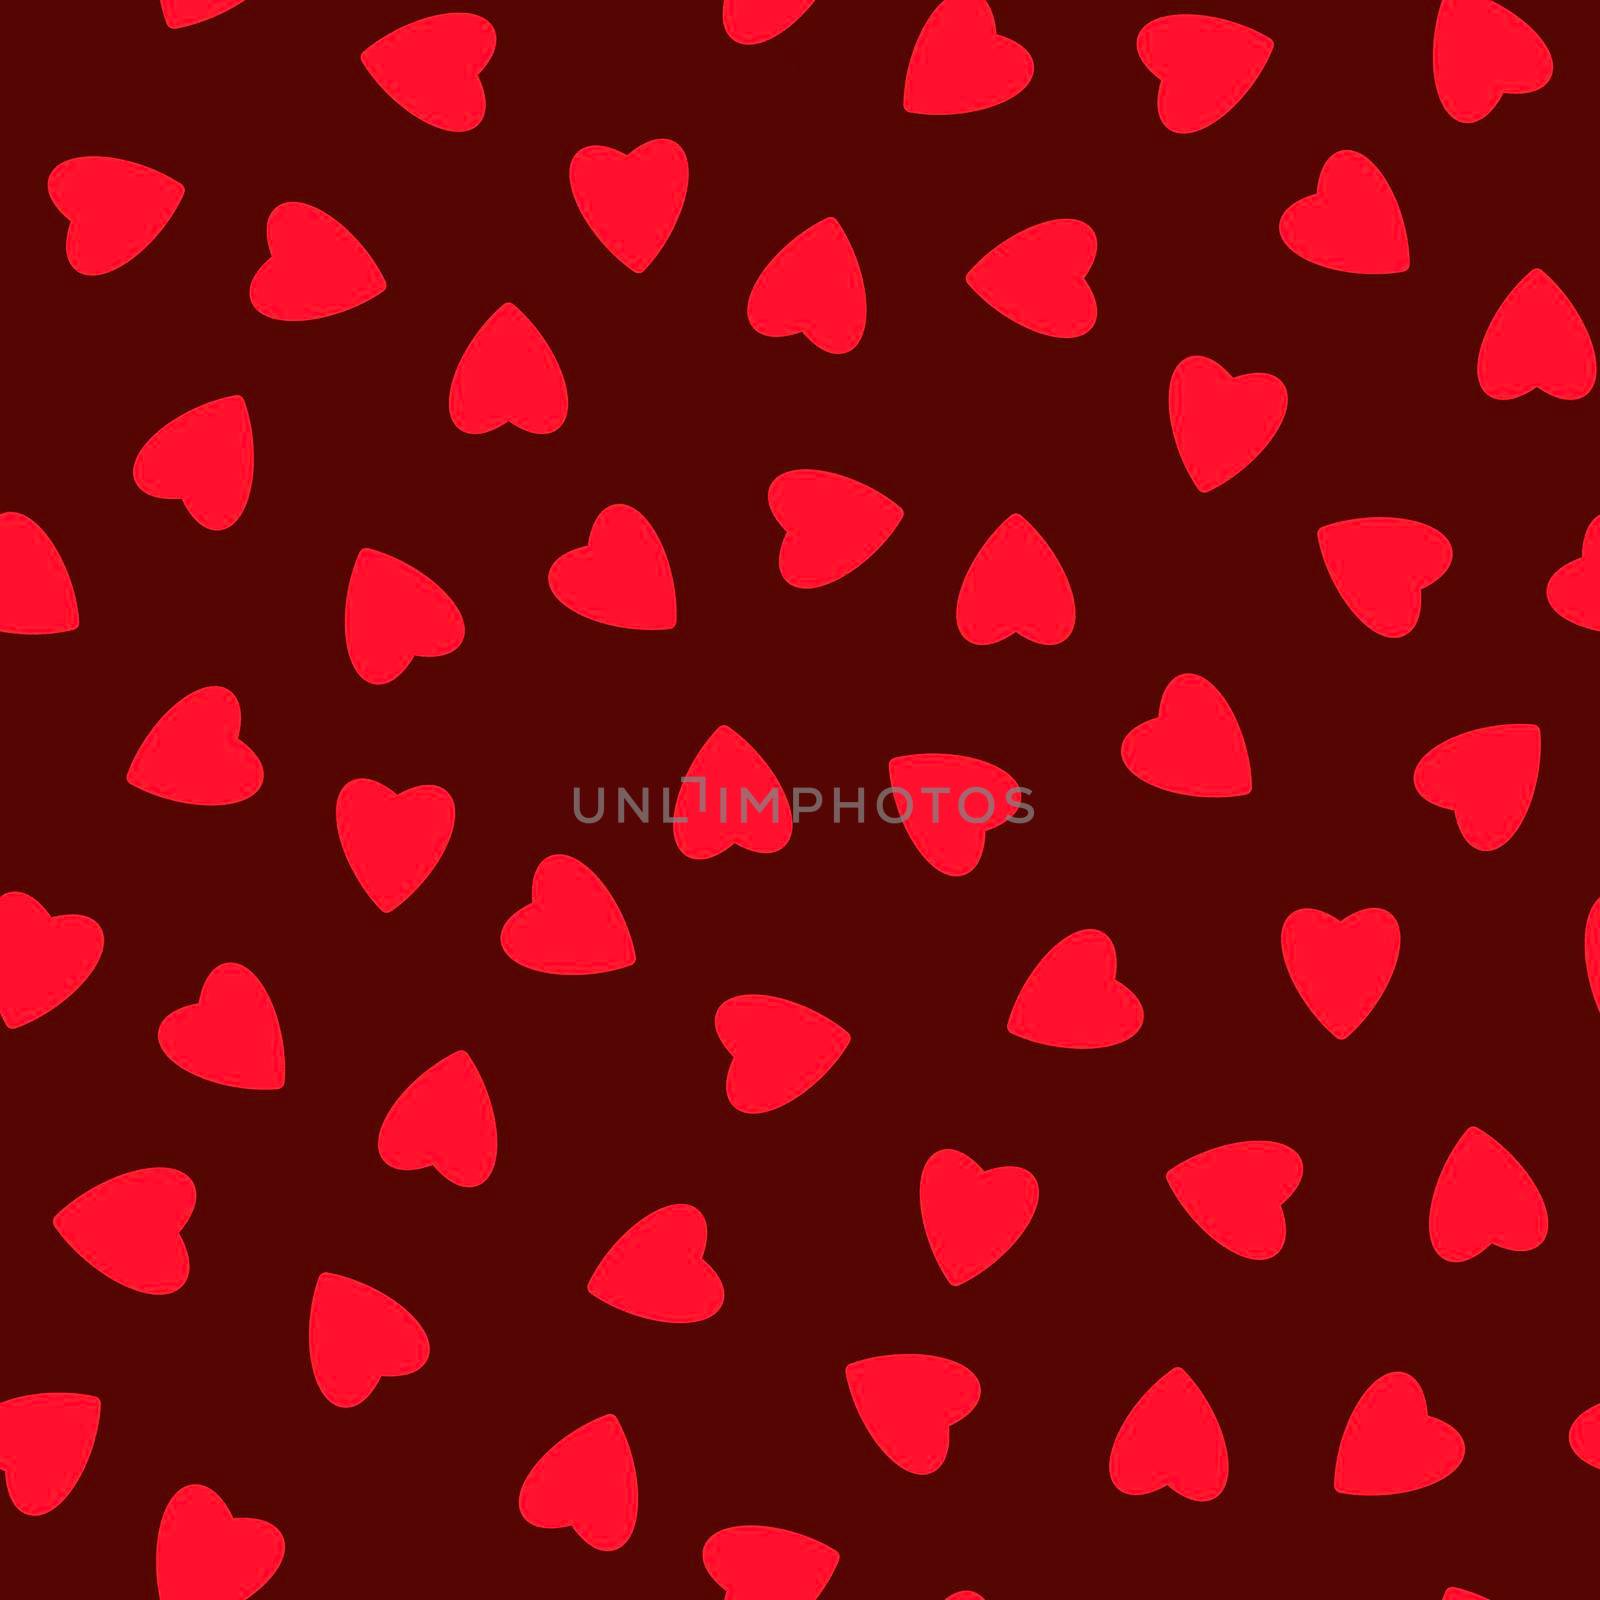 Simple hearts seamless pattern,endless chaotic texture made of tiny heart silhouettes.Valentines,mothers day background.Great for Easter,wedding,scrapbook,gift wrapping paper,textiles.Red on burgundy by Angelsmoon